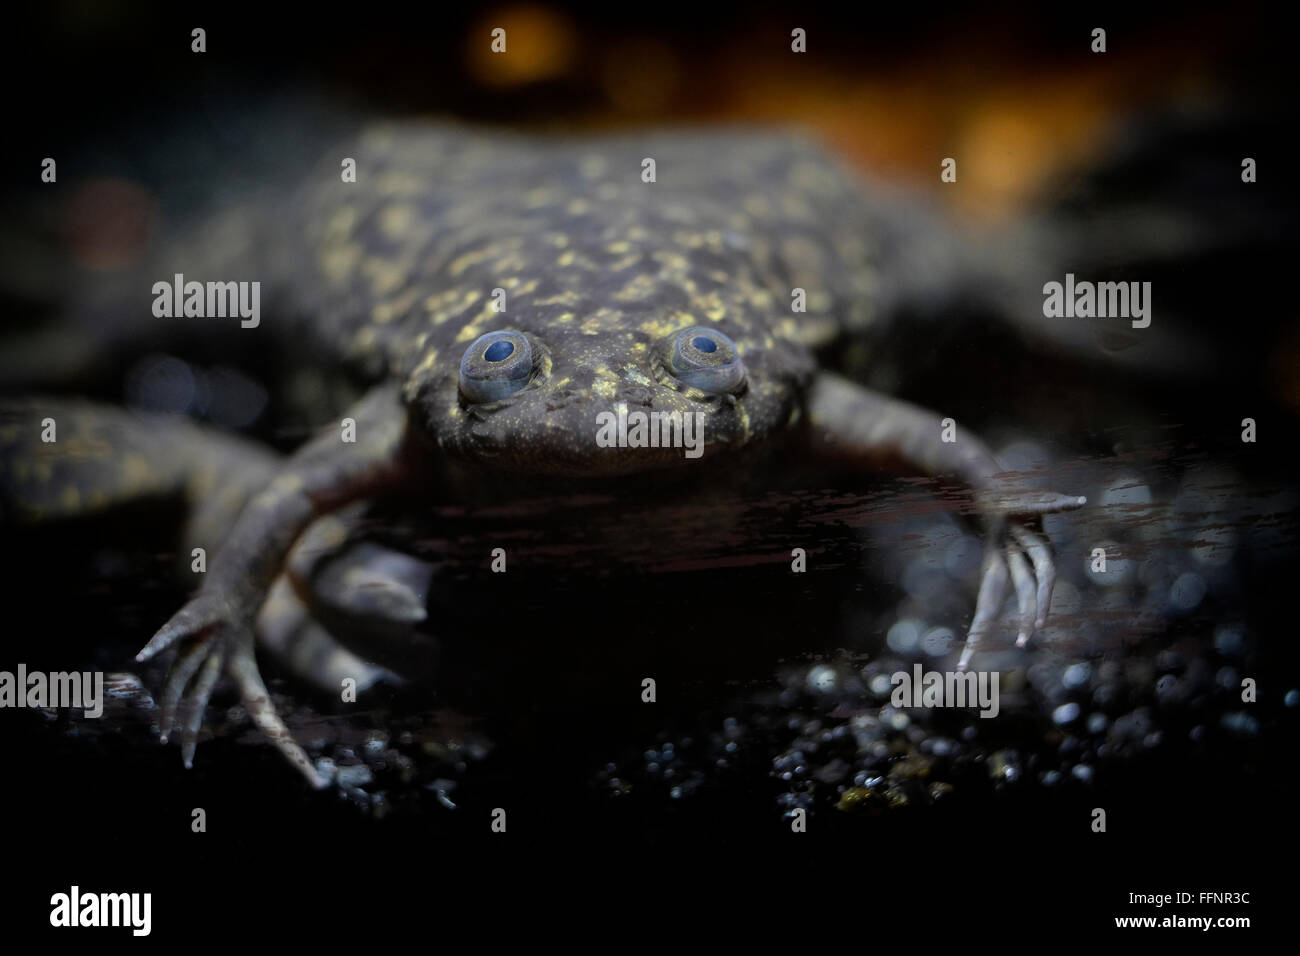 The African clawed frog  Xenopus laevis, also known as the xenopus, African clawed toad, African claw-toed frog or the platanna Stock Photo